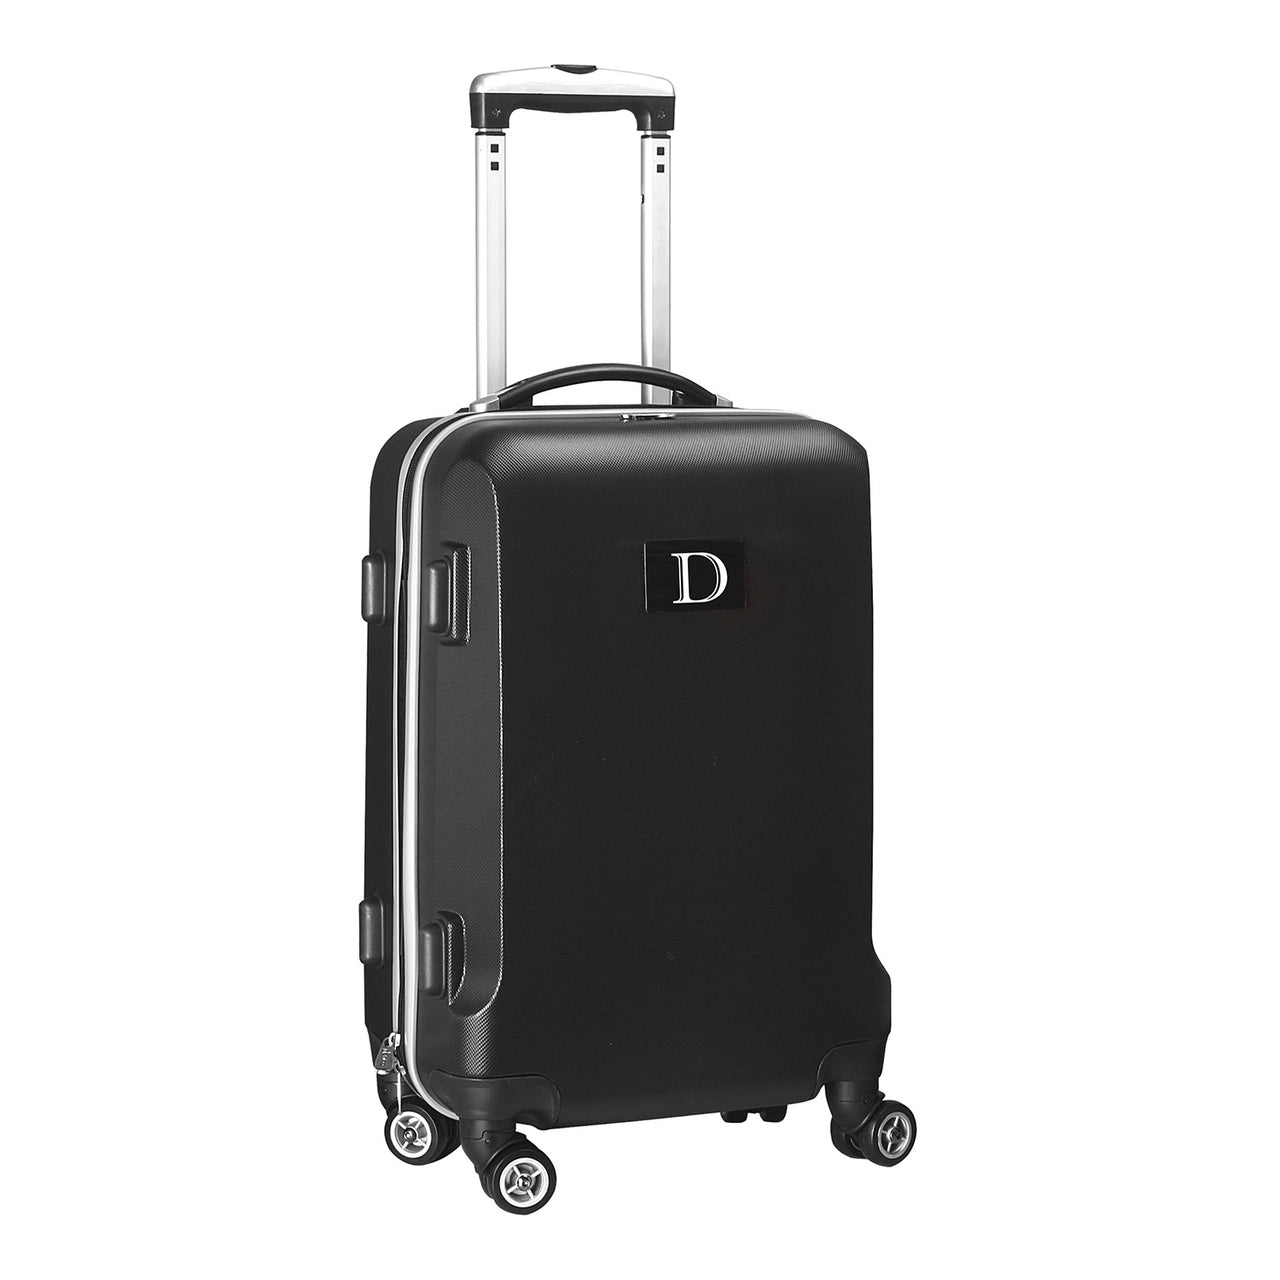 Personalized Initial Name letter "D" 20 inches Carry on Hardcase Spinner Luggage by Mojo in BLACK